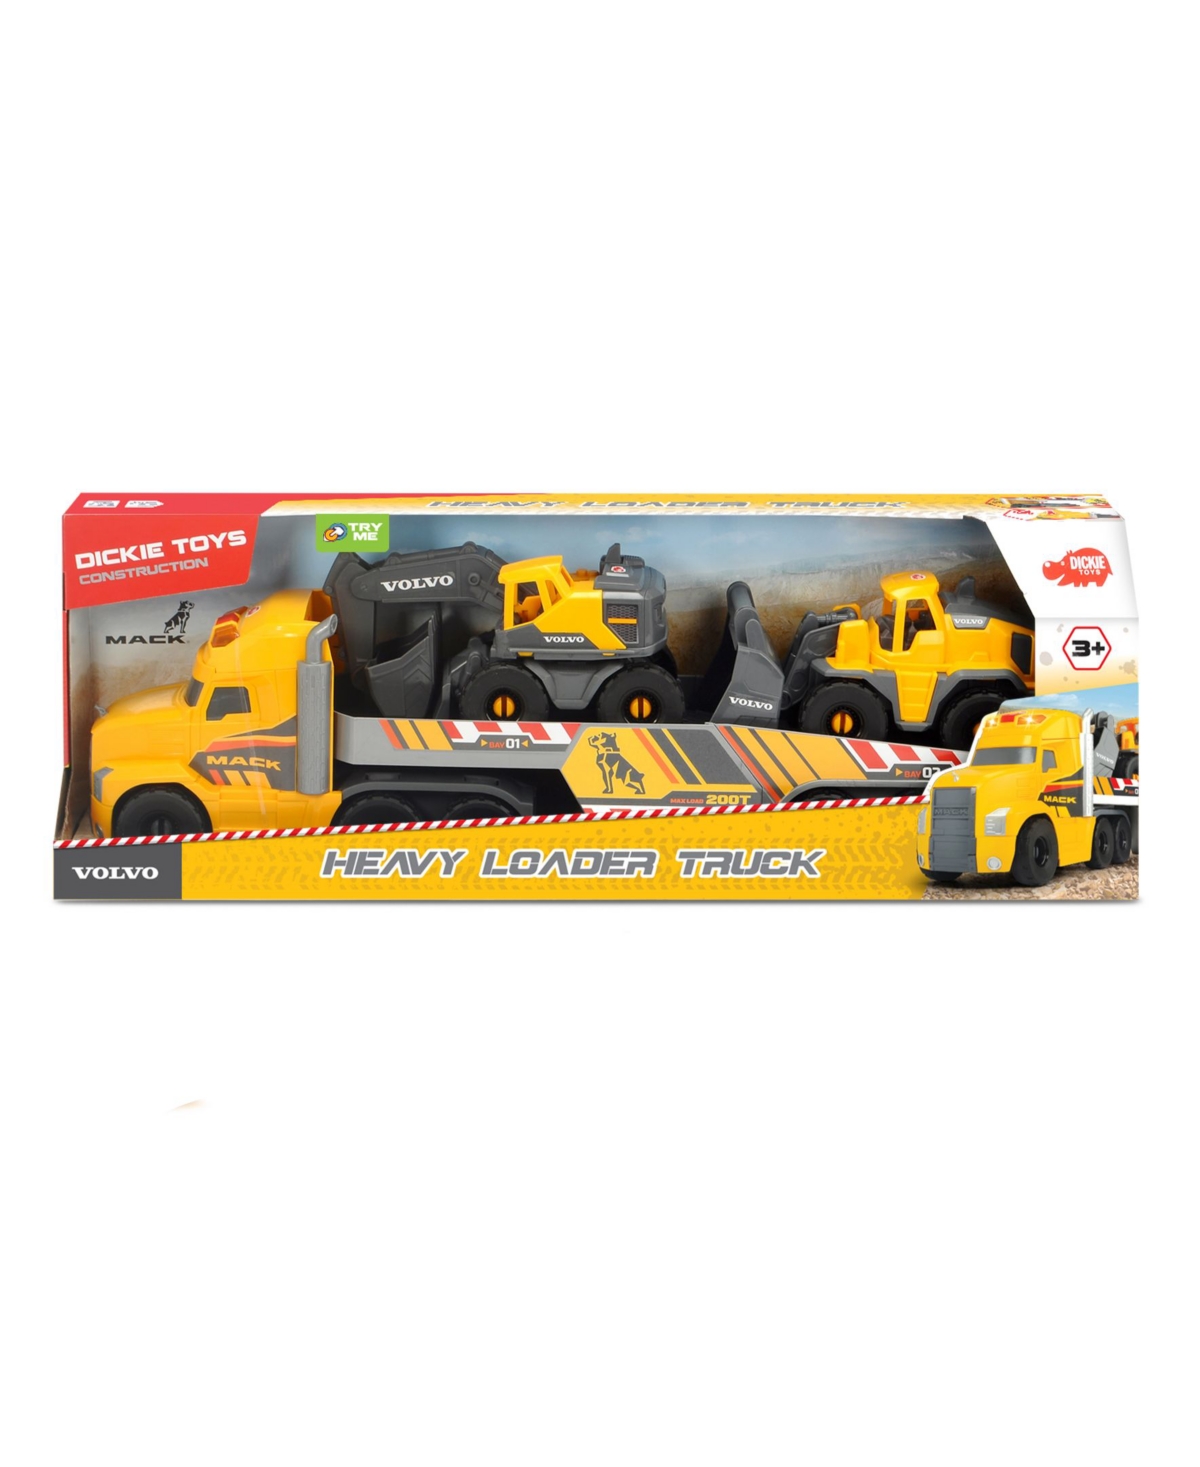 Shop Dickie Toys Hk Ltd Dickie Toys 28" Mack Truck With 2 Volvo Construction Trucks In Yellow